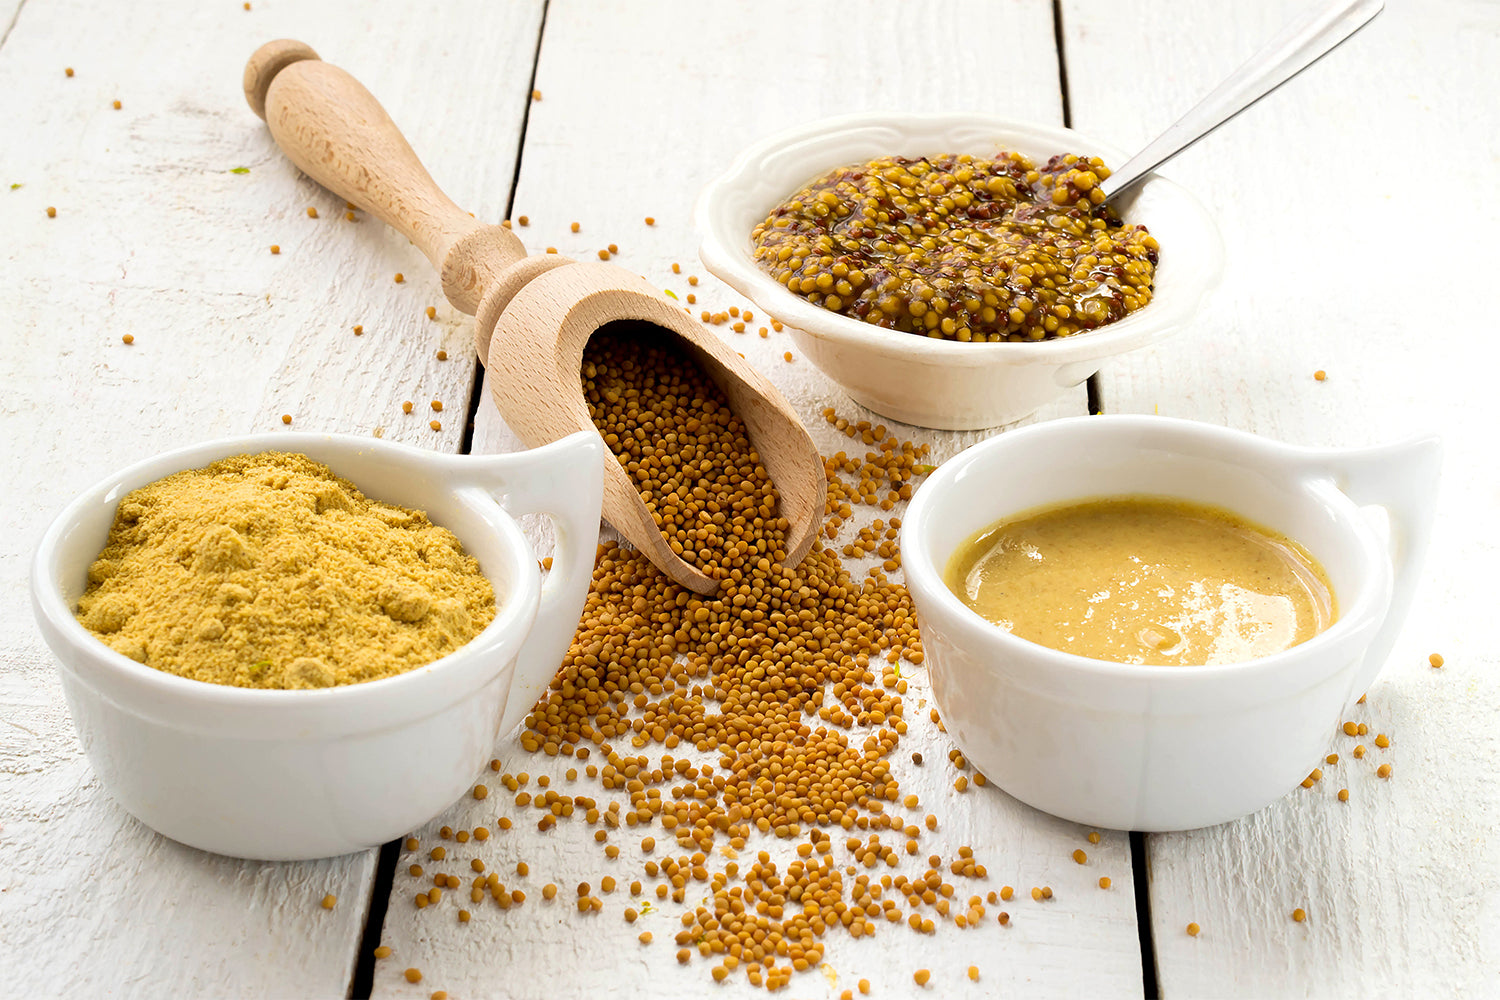 Fresh mustard powder and organic ingredients used in Kekoa Foods baby food pouches.